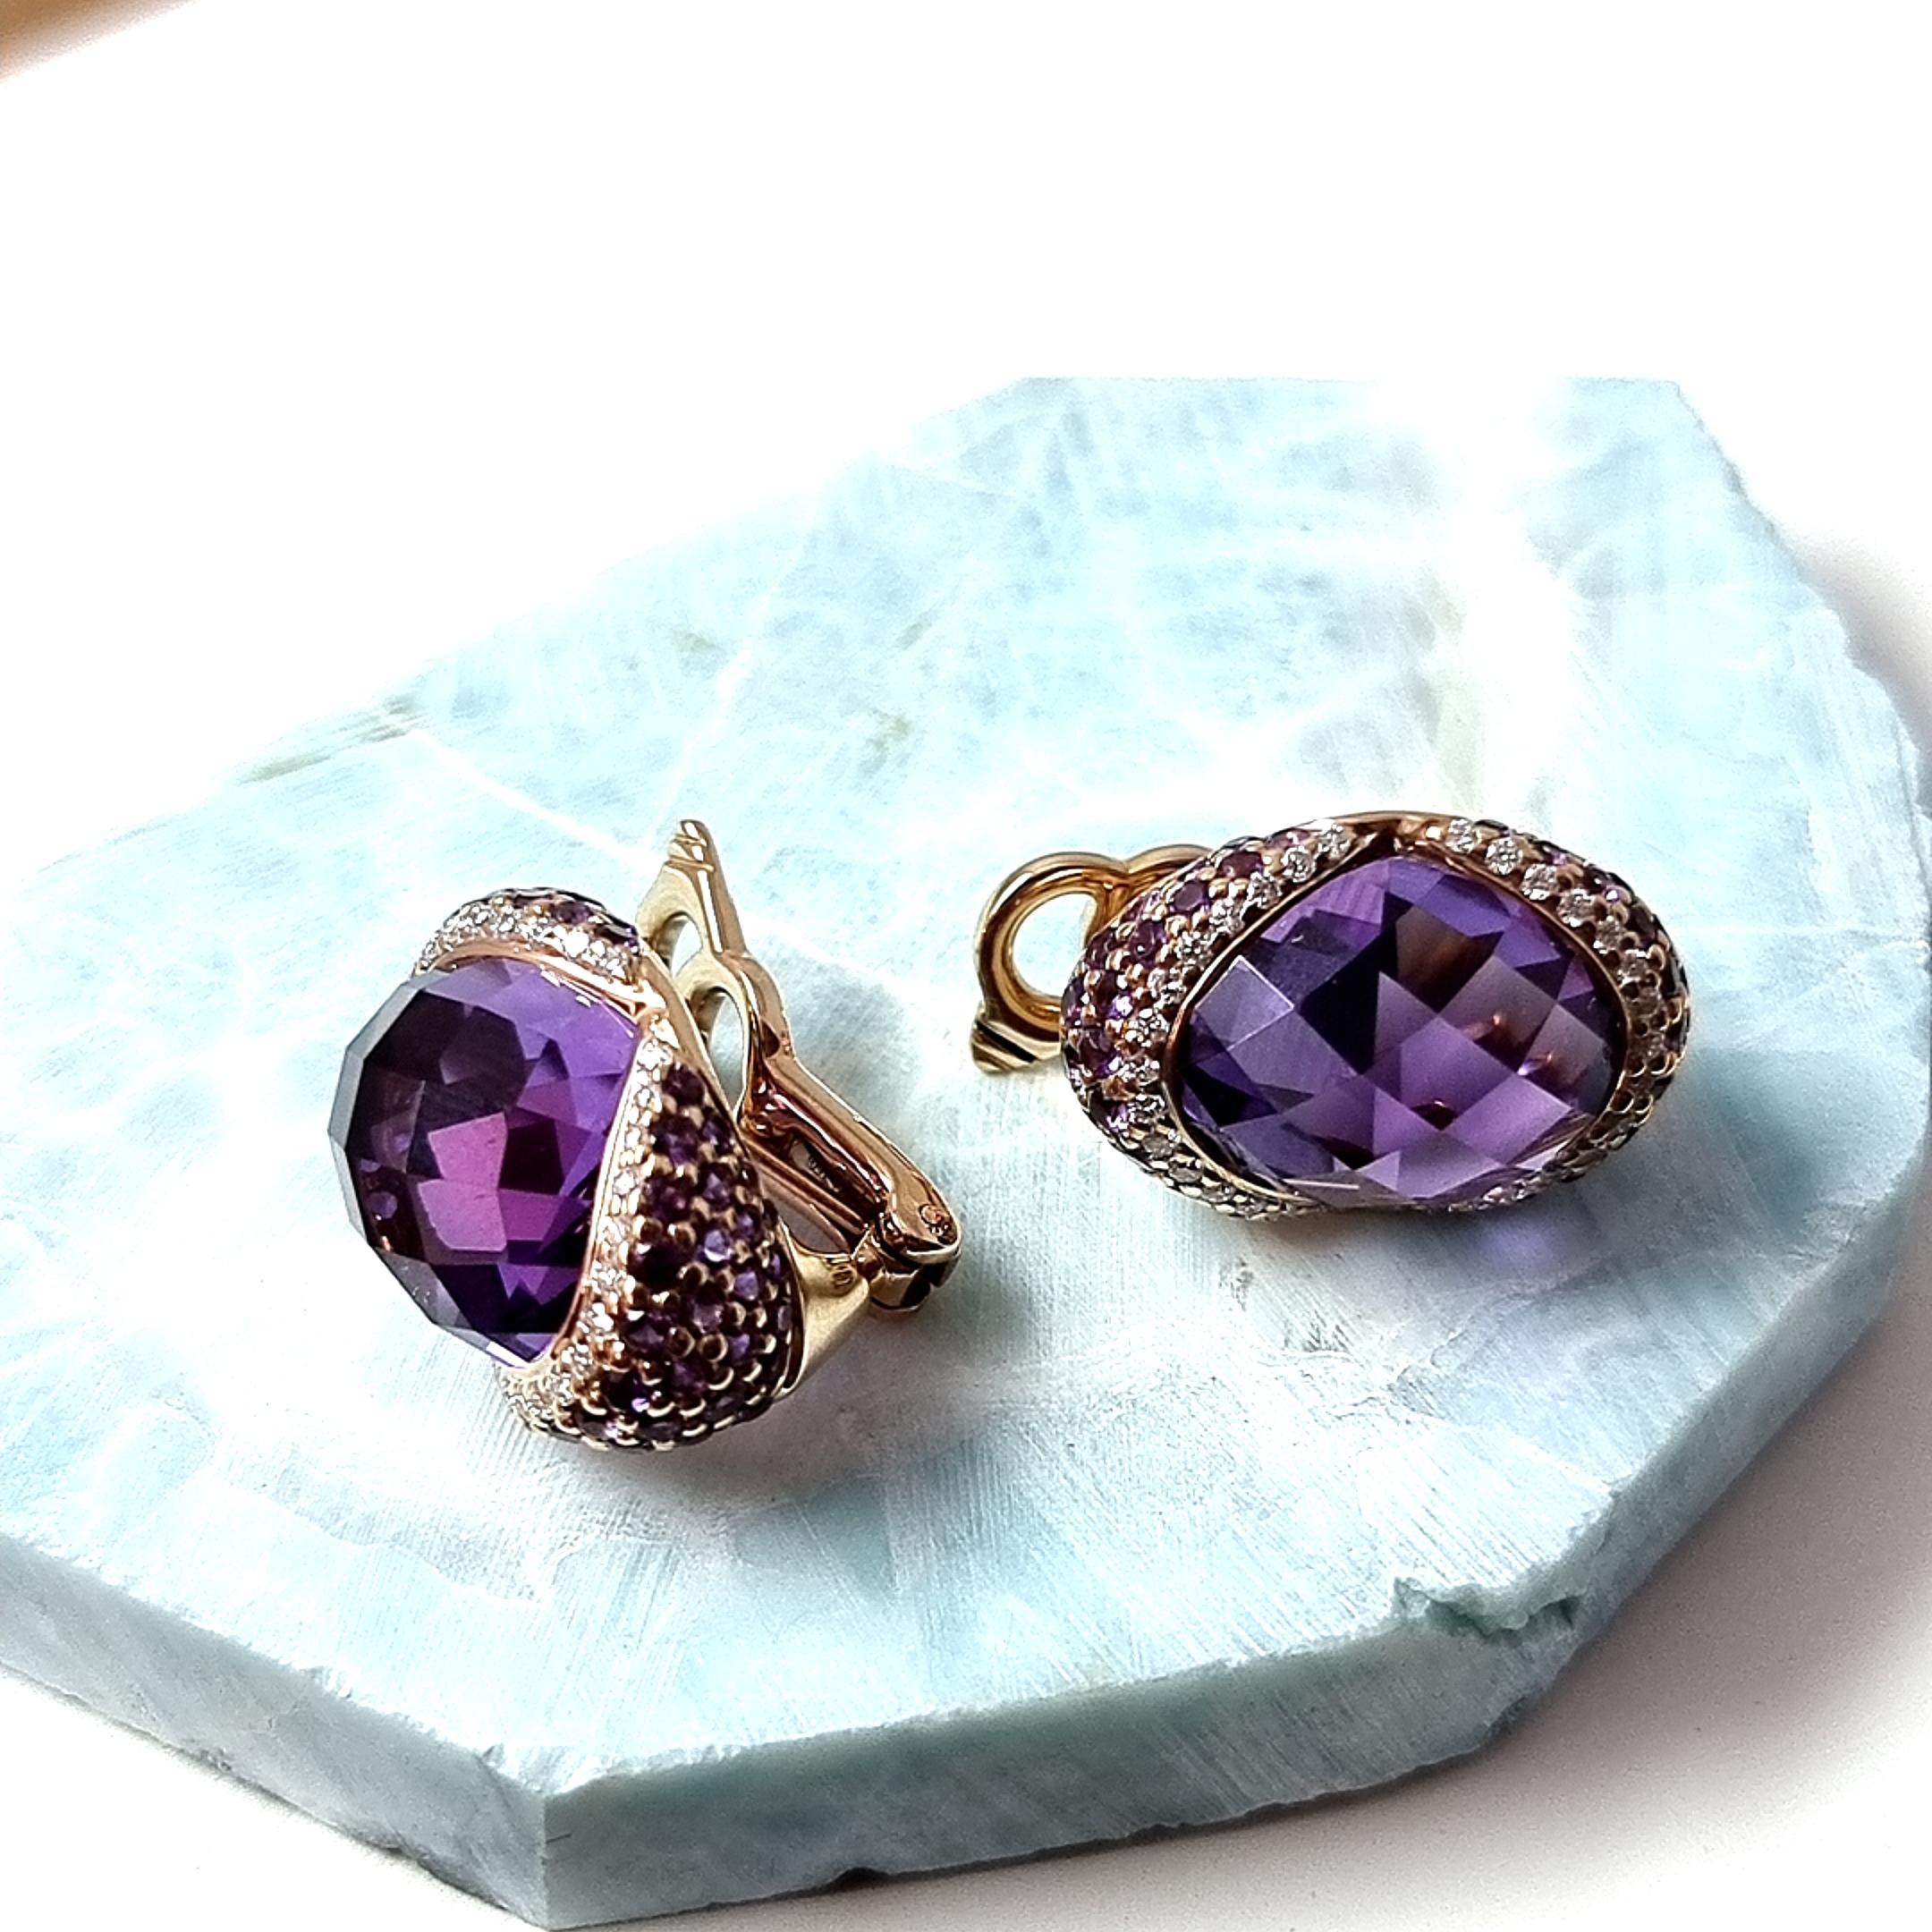 18K Yellow Gold Earrings with White Diamonds and Amethysts 1